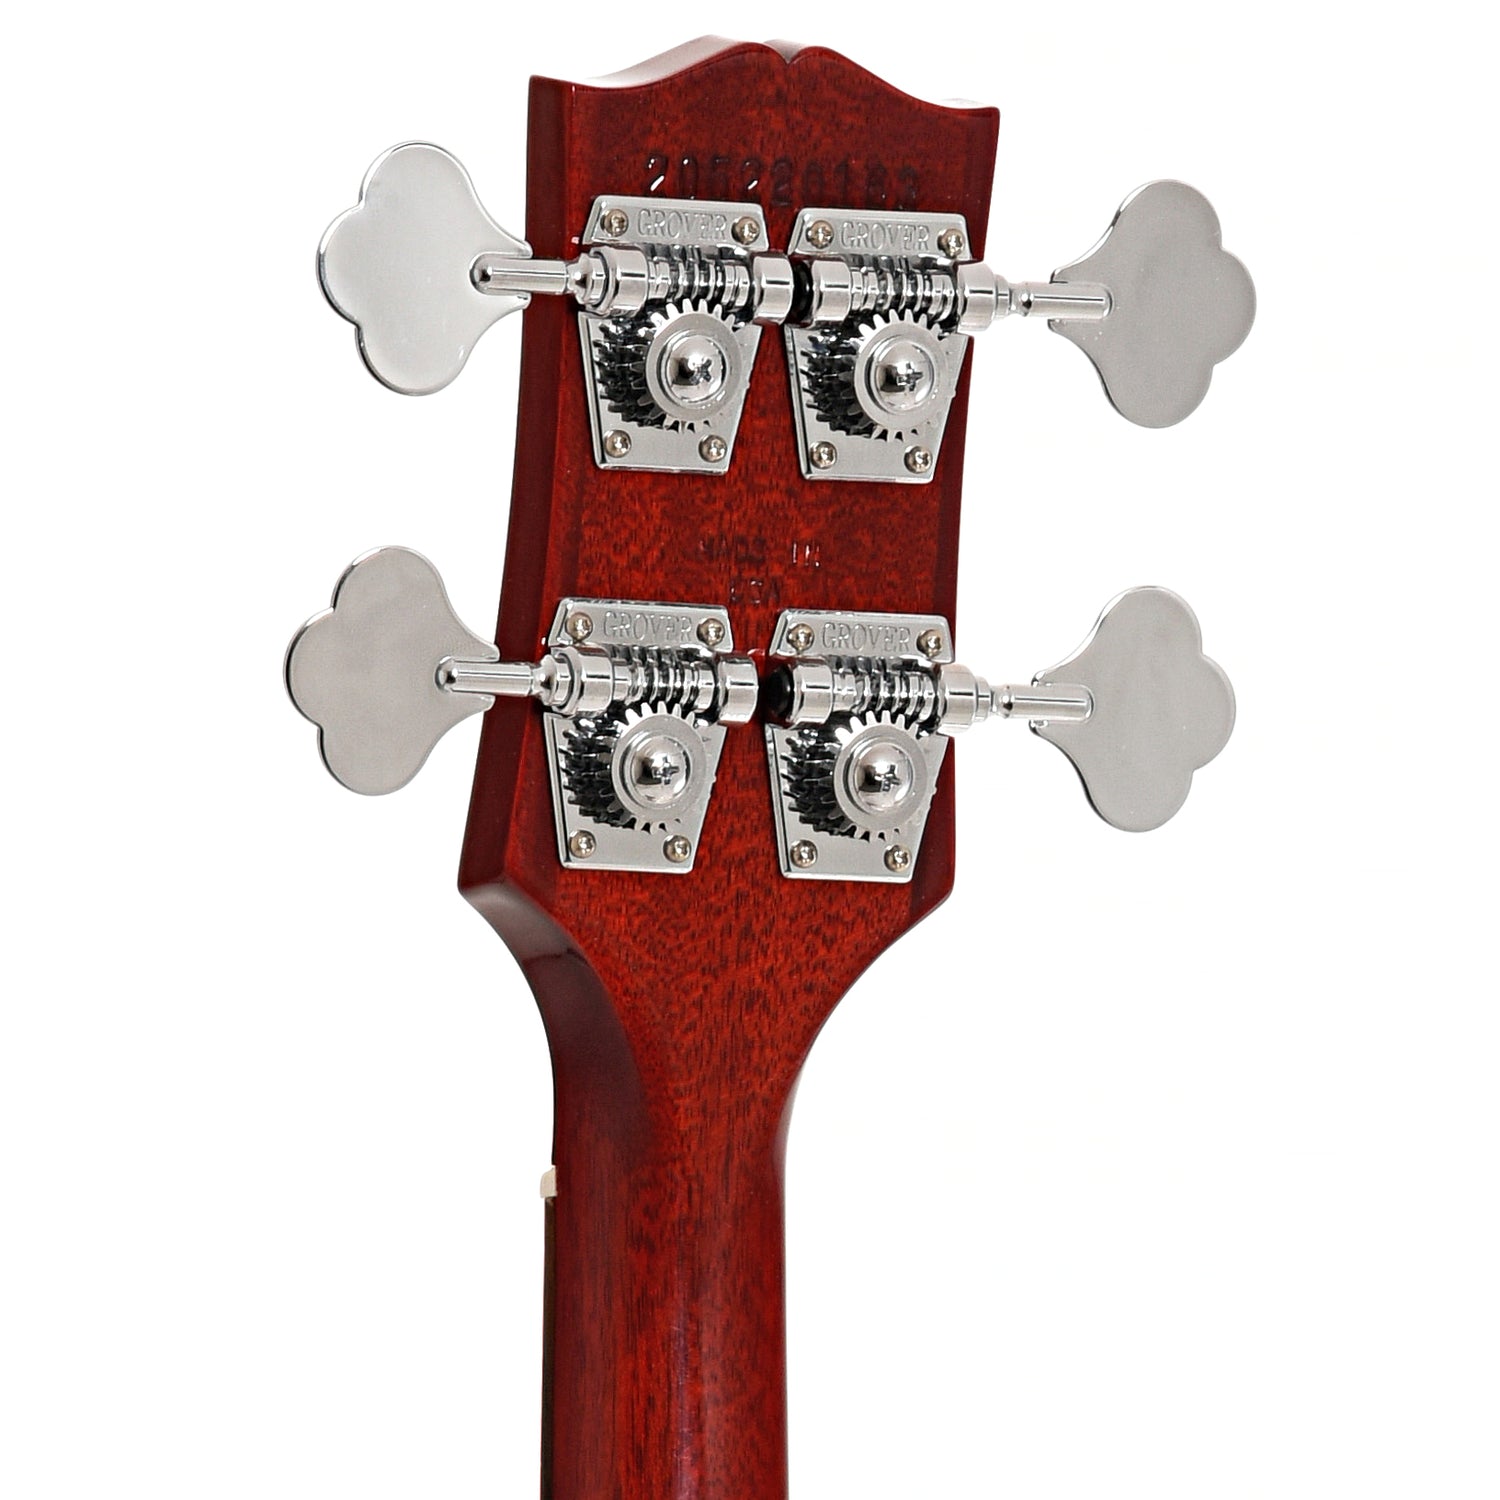 Back headstock of Gibson SG Bass